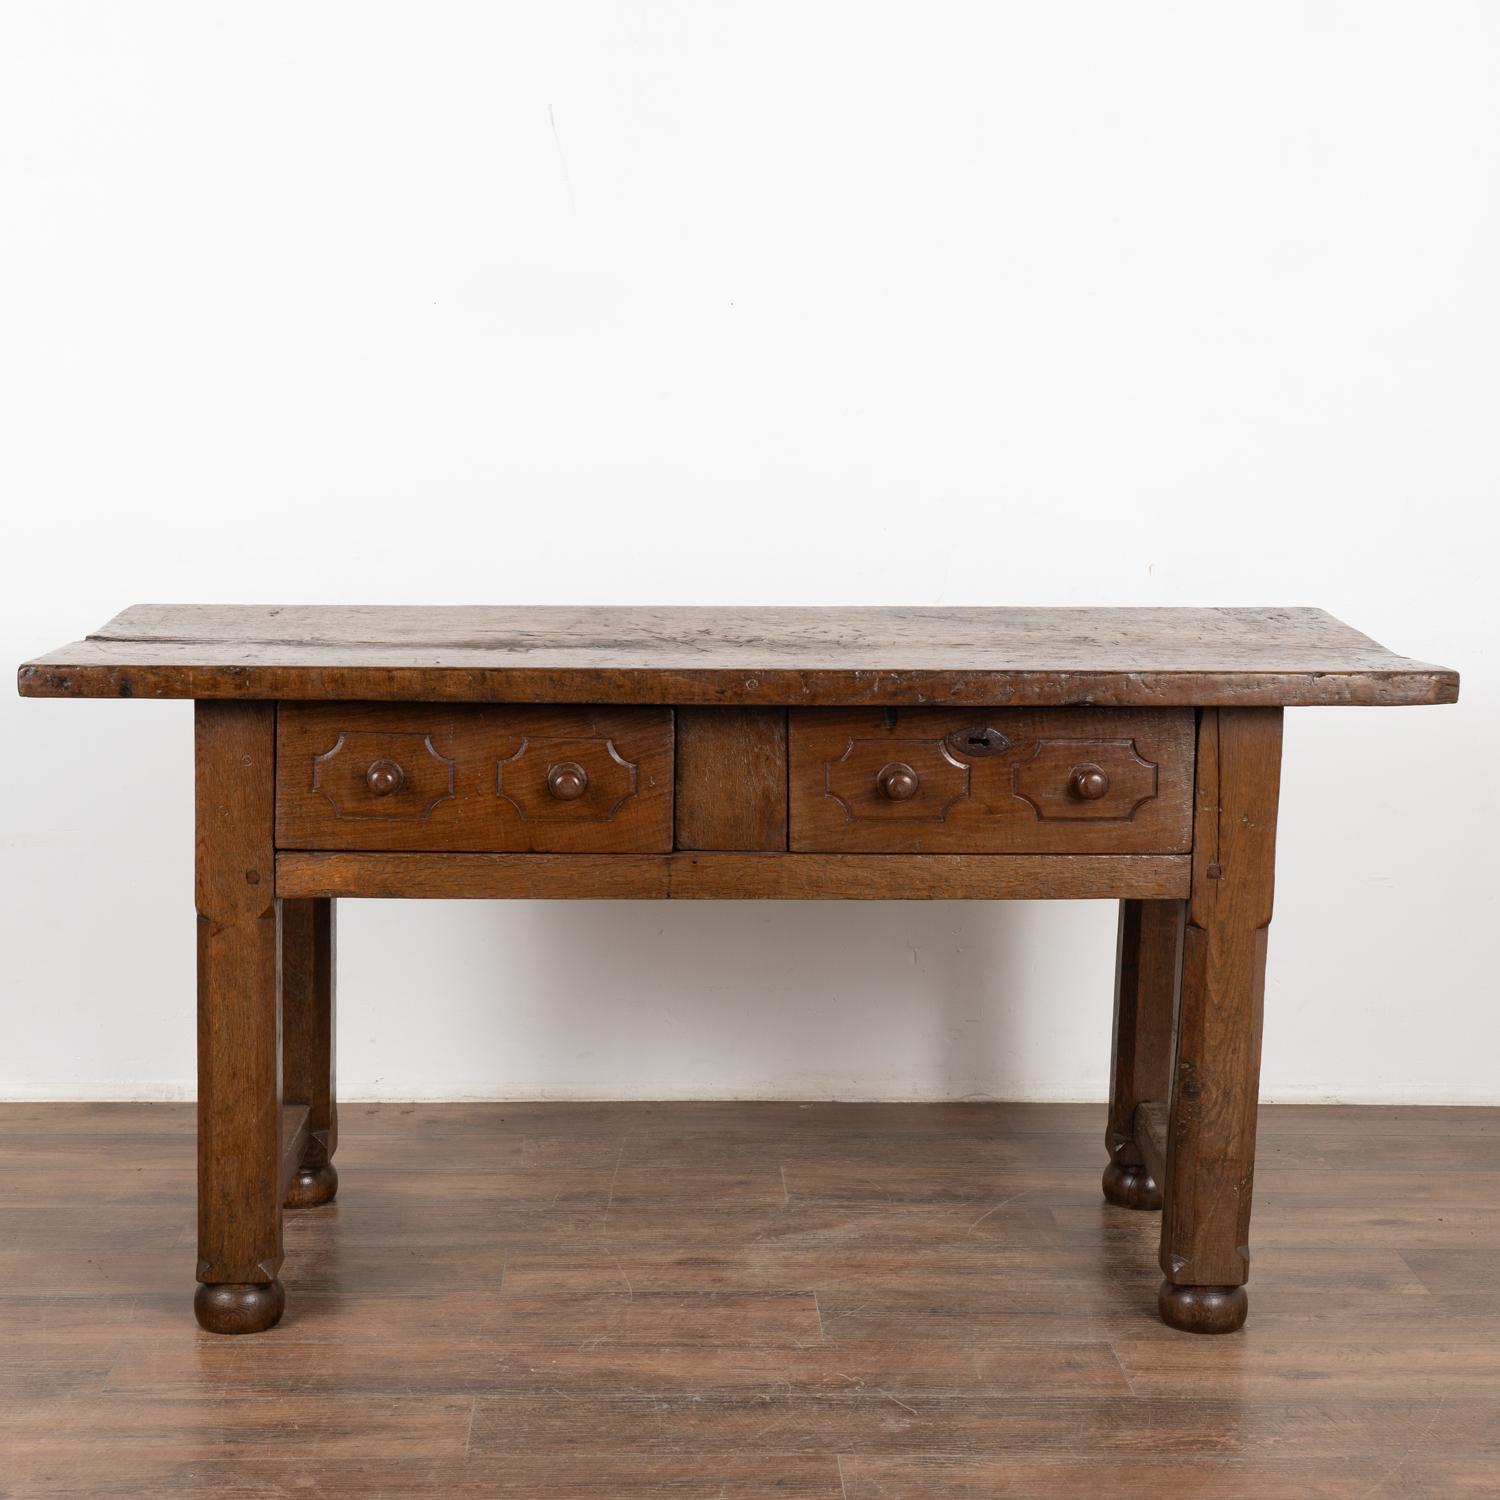 Spanish Dark Oak Console Table with Two Drawers, Spain 1800's For Sale